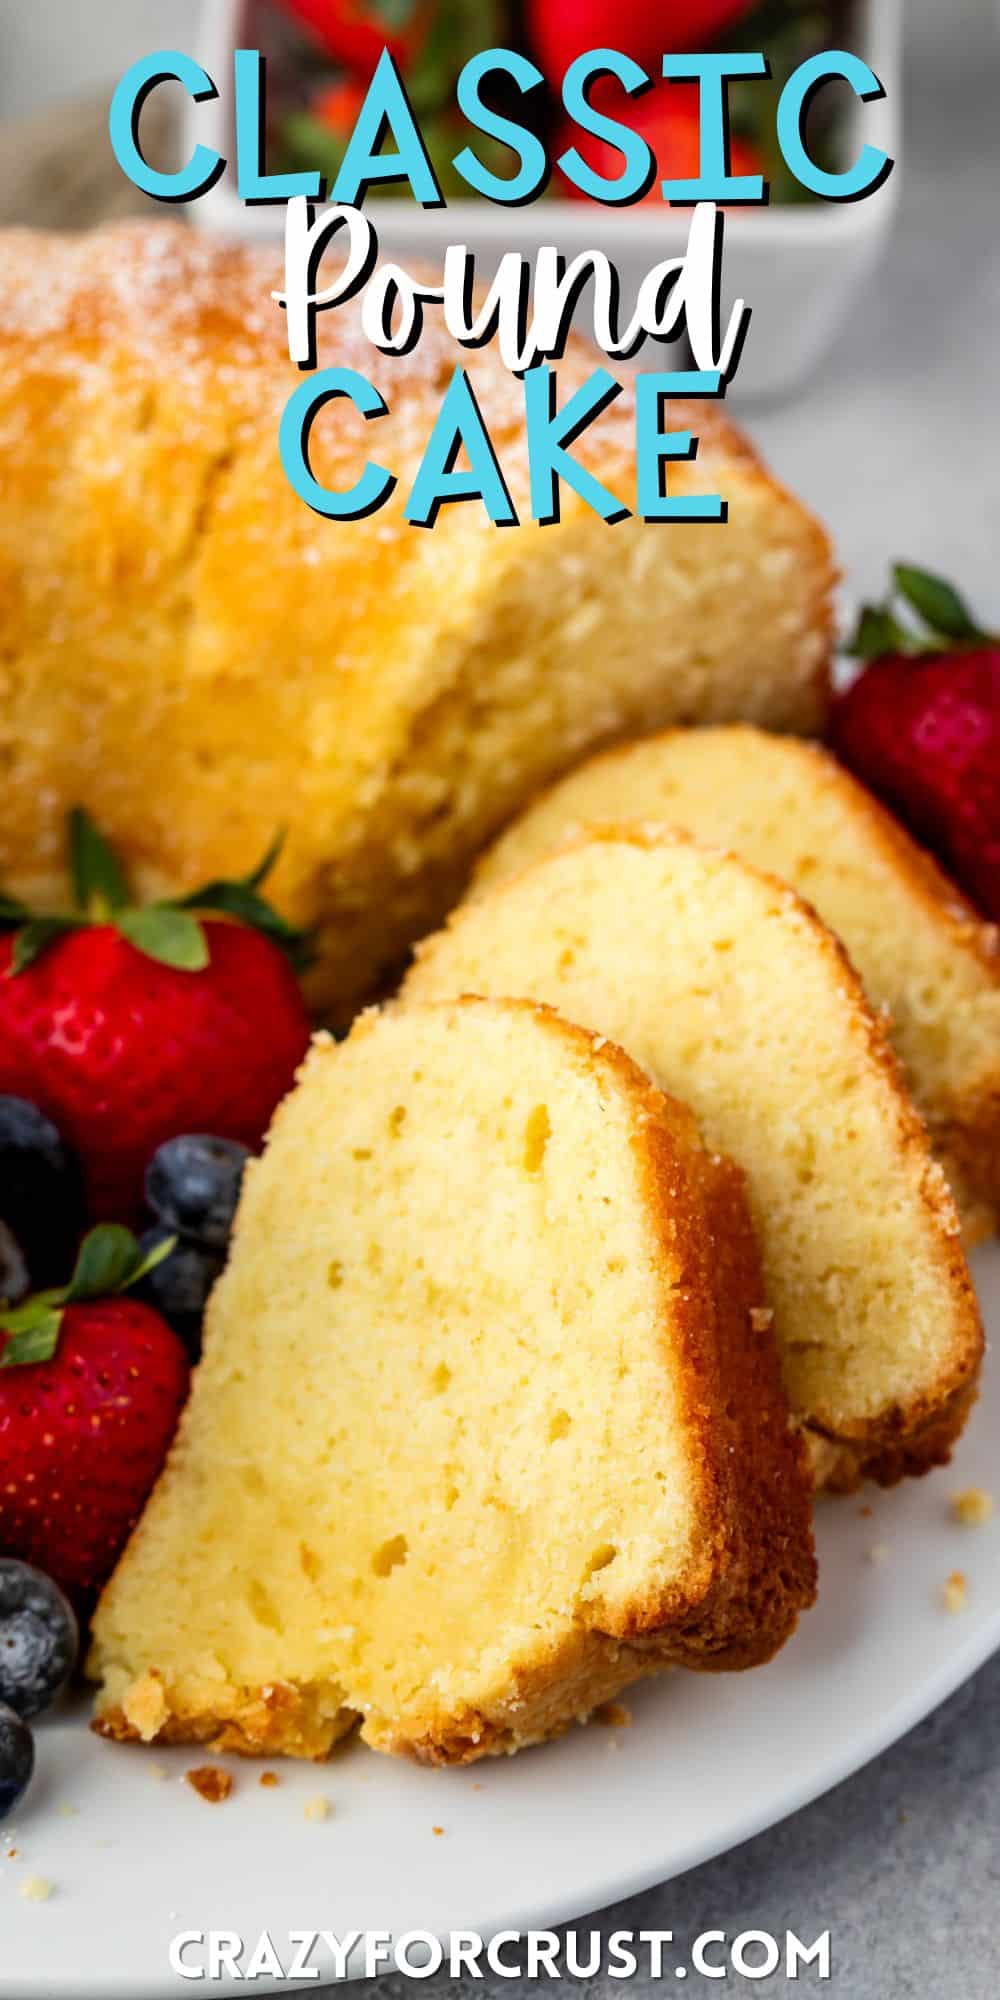 sliced pound cake on a white plate next to strawberries and blueberries with words on the image.